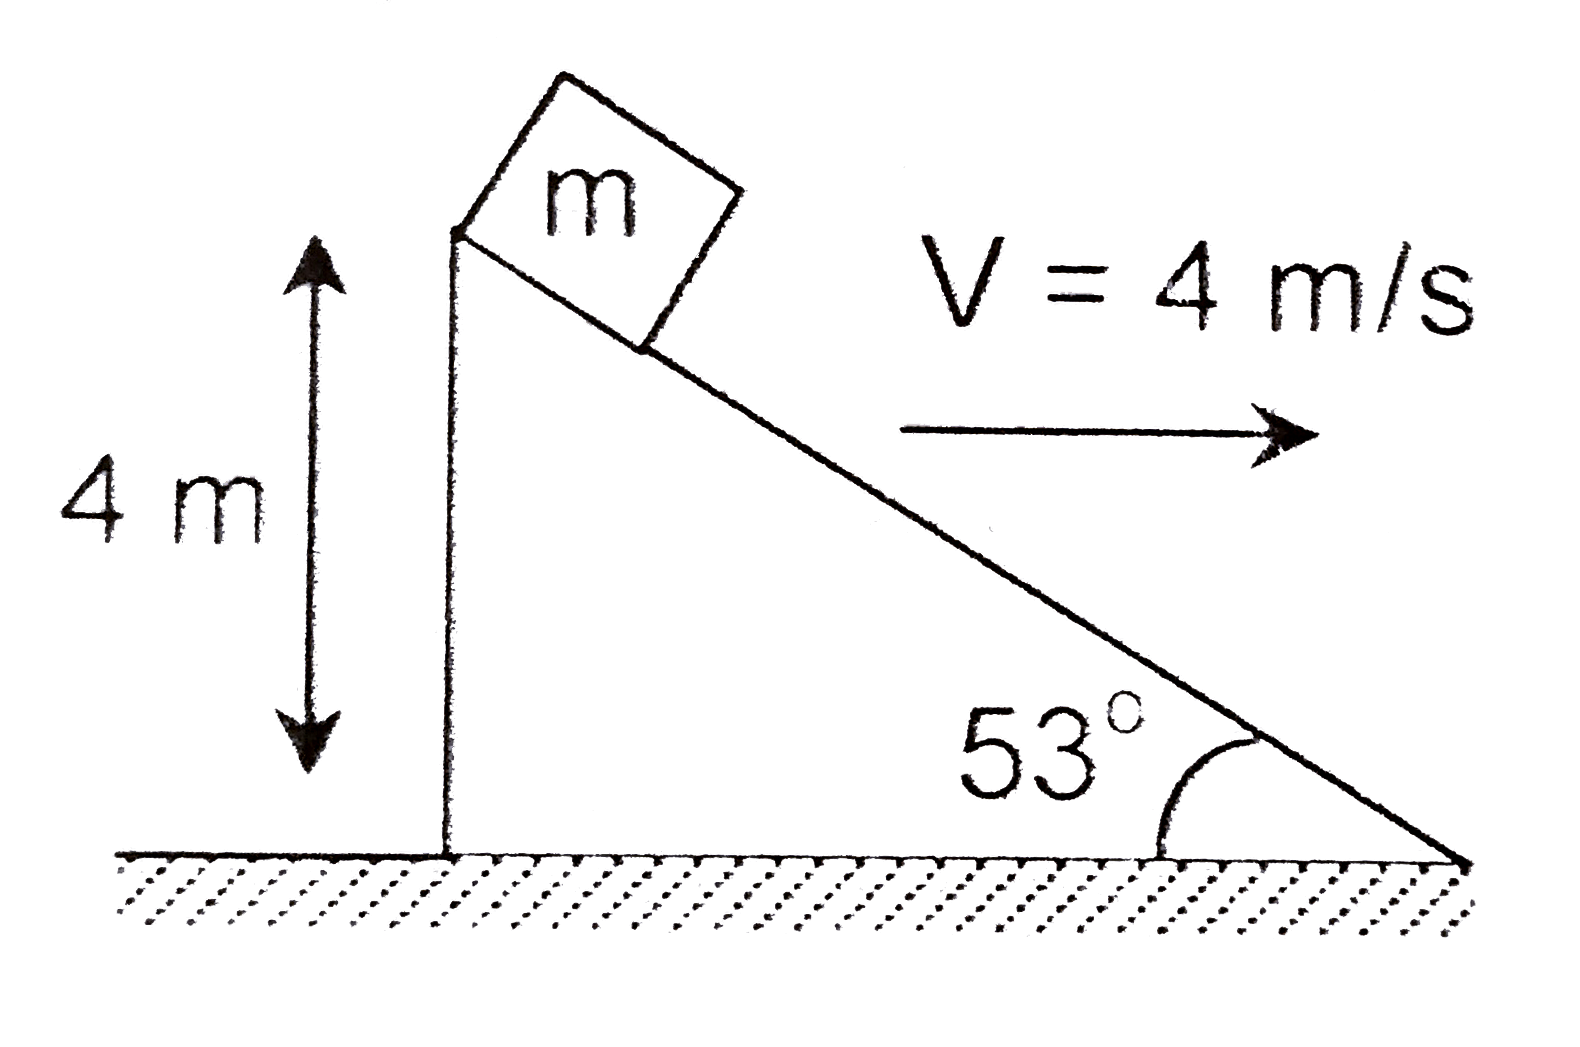 An inclined plane is moving with Constant velocity v = 4 m//s on a horizoontal surface as shown in figure. If a block of mass 2 kg is kept at top of the incline and their is no friction between the block and the incline, then the distance travelled by the incline till the block reaches bottom of the inclined is (g = 10 m//s^(2))